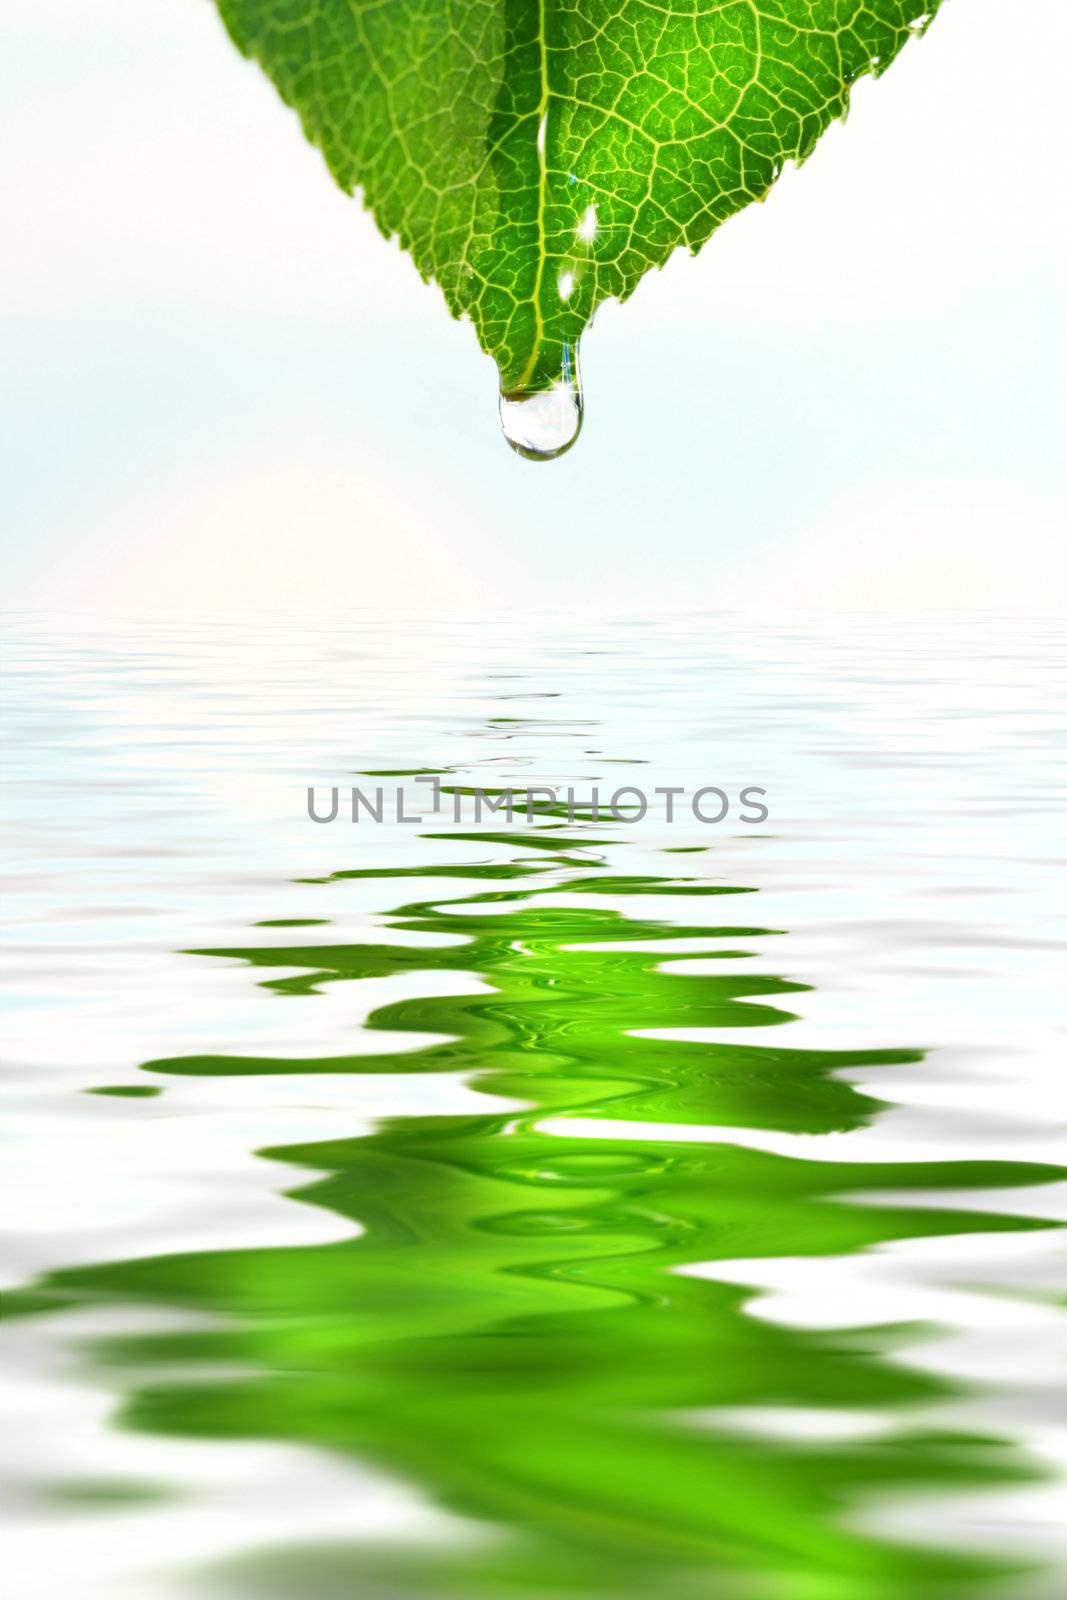 Green leaf over water reflection by Sandralise